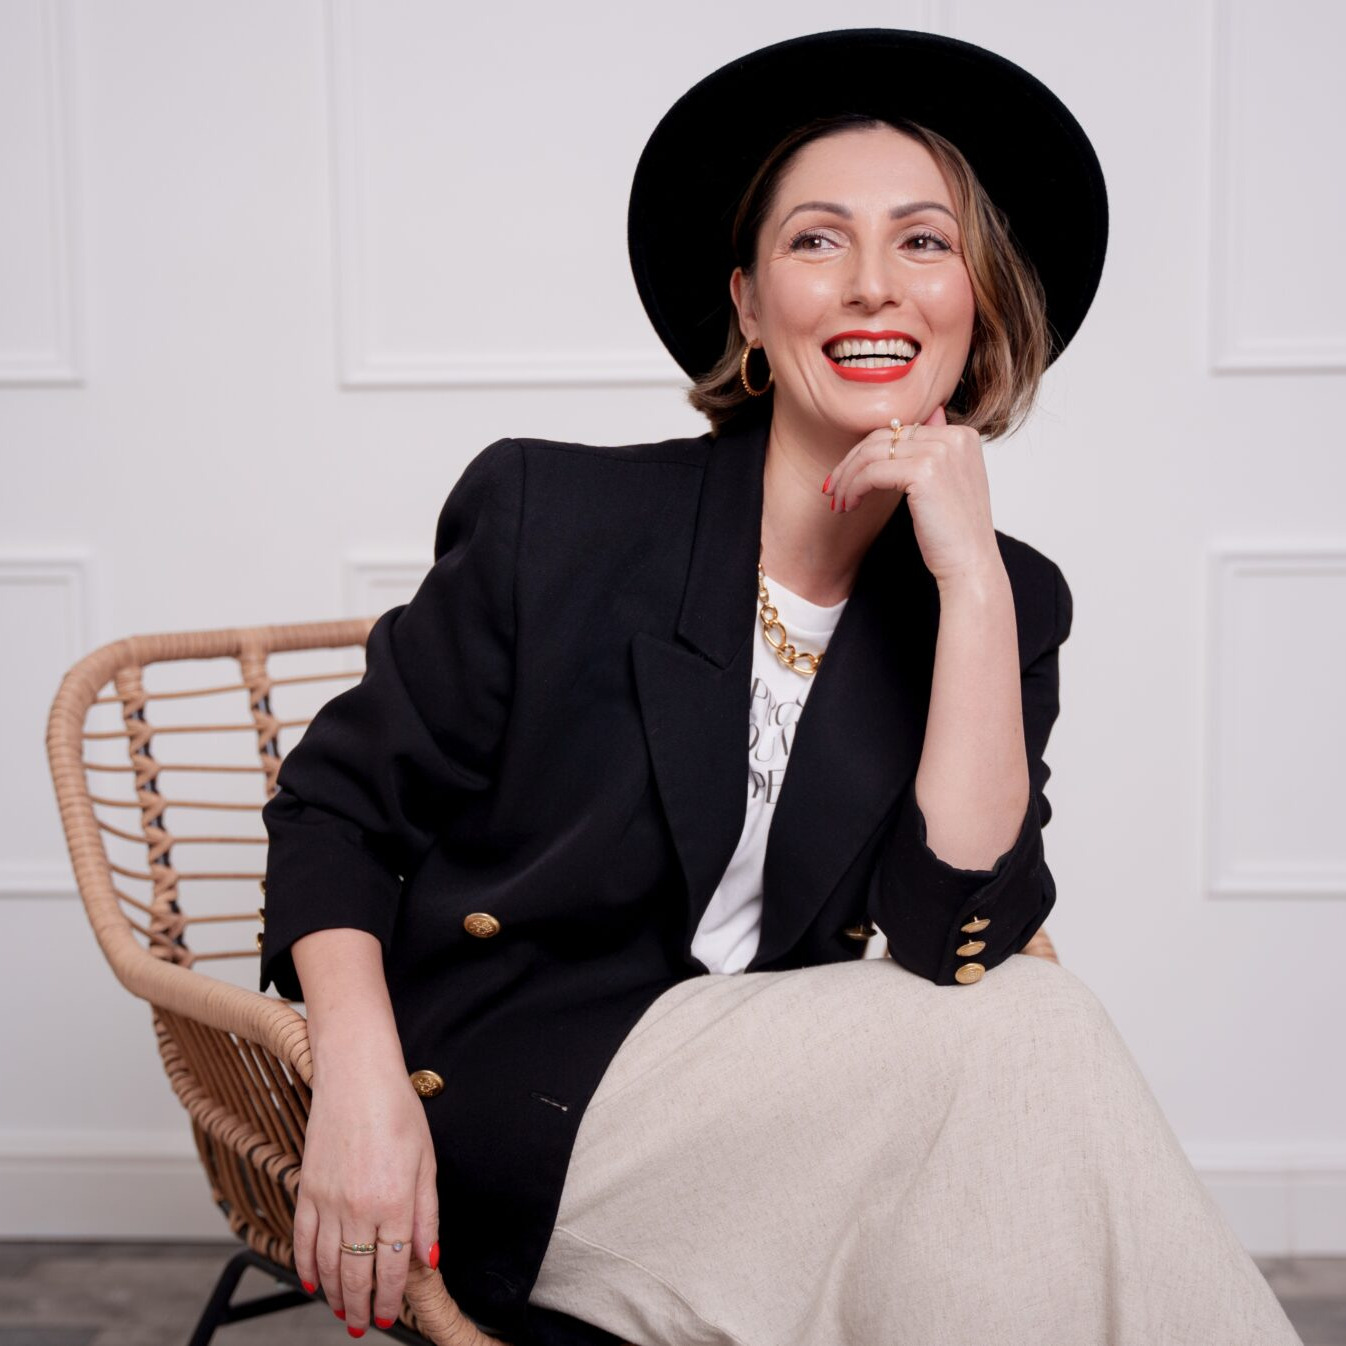 Sustainable fashion Stylist Roberta Lee, sits in a chair smiling